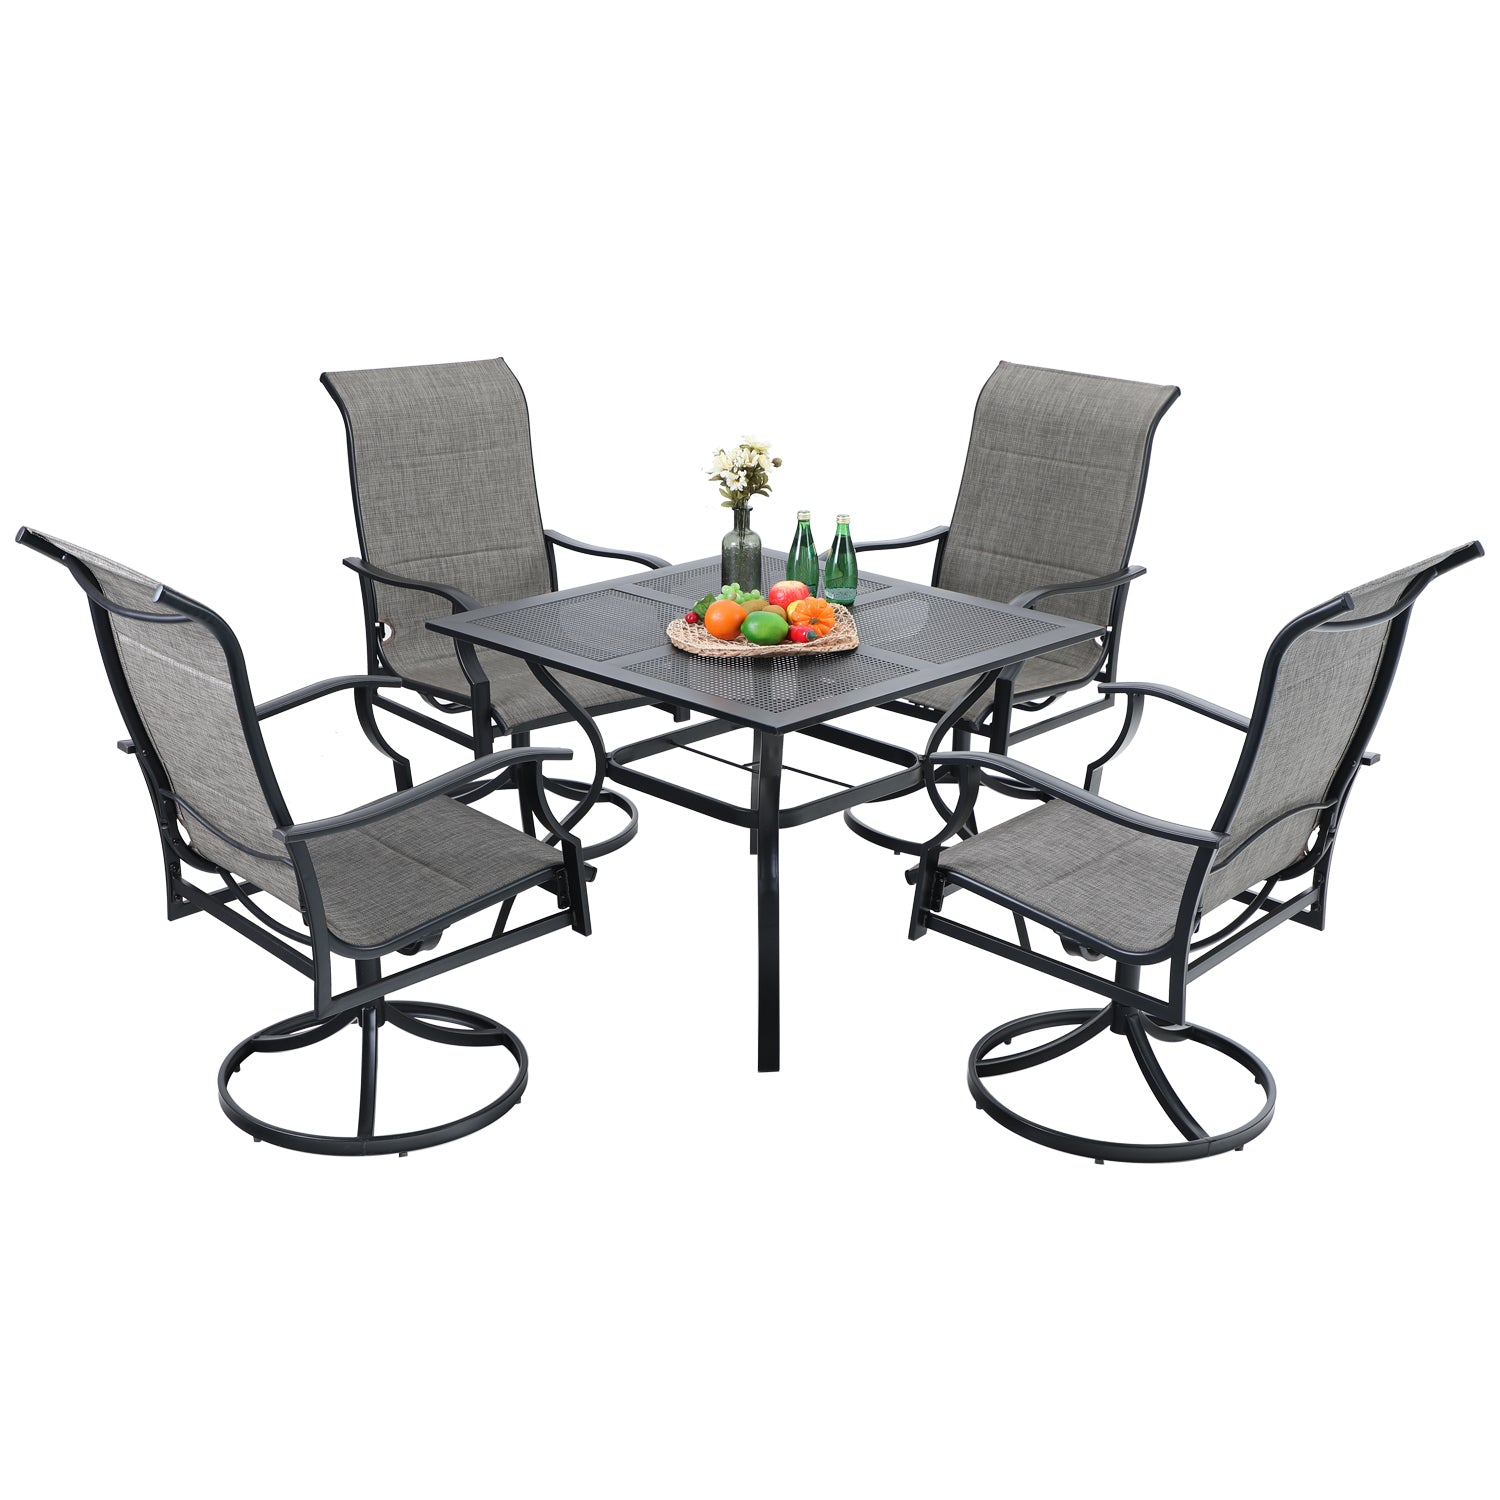 PHI VILLA Mesh Square Table and 4 Textilene Swivel Chairs 5-Piece Outdoor Dining Set